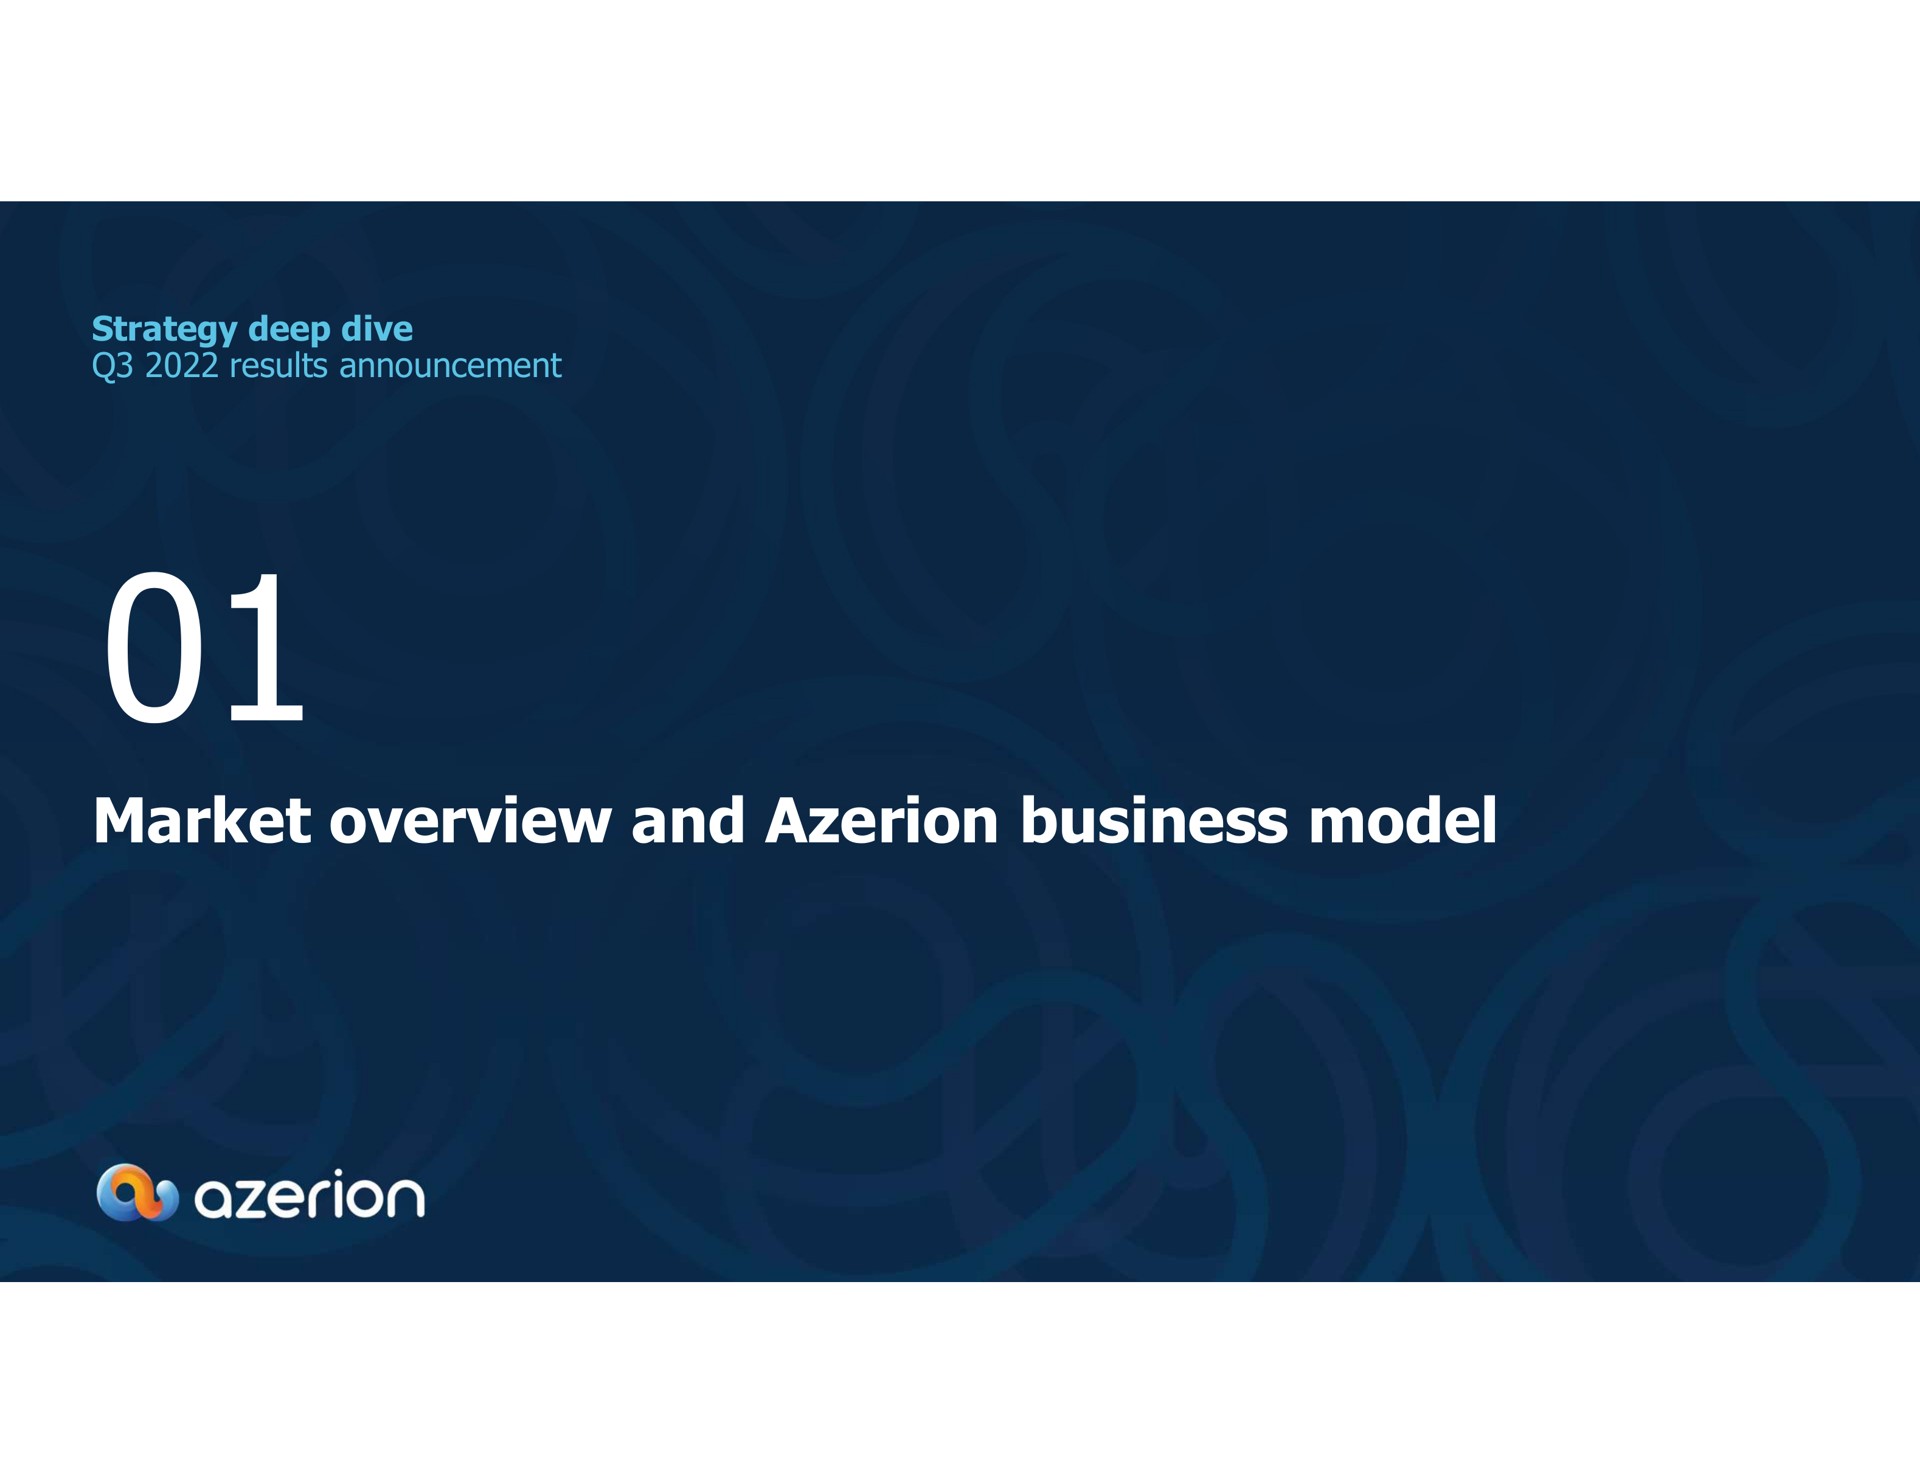 strategy deep dive results announcement market overview and business model as | Azerion